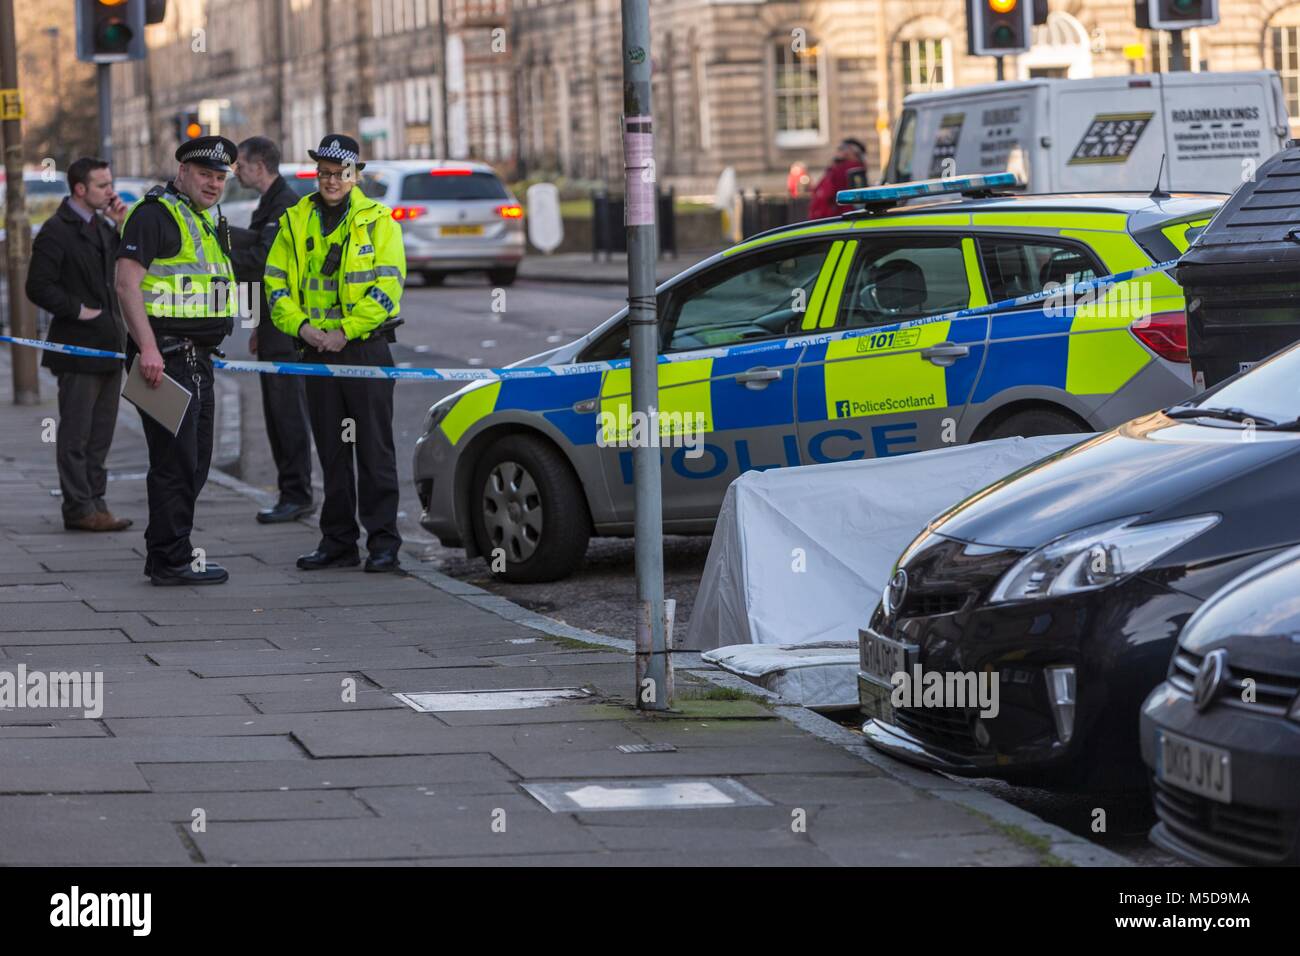 Edinburgh, UK. 22nd February, 2018. Police in Edinburgh are currently in attendance following the discovery of a man's body in East London Street.   The incident was reported to police and emergency services around 7.45am on Thursday, February 22.   Inquiries are currently ongoing, and the death is being treated as unexplained. A report will be submitted to the Procurator Fiscal. Credit: Rich Dyson/Alamy Live News Stock Photo